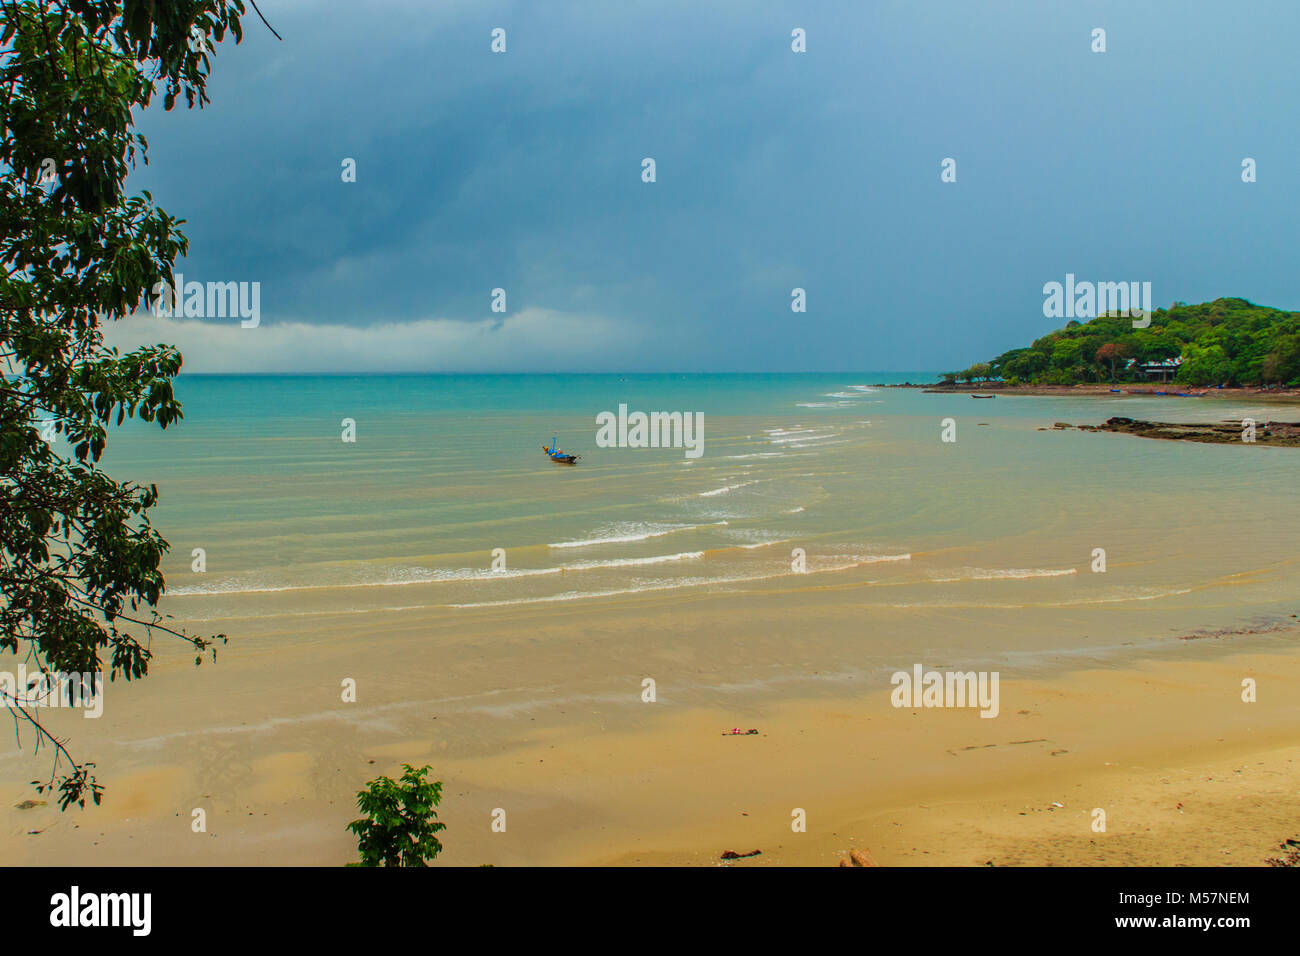 Peaceful seascape view with fisherman village on the beach in the rainy seasons at Hinsuay Namsai beach, Rayong, Thailand. Stock Photo